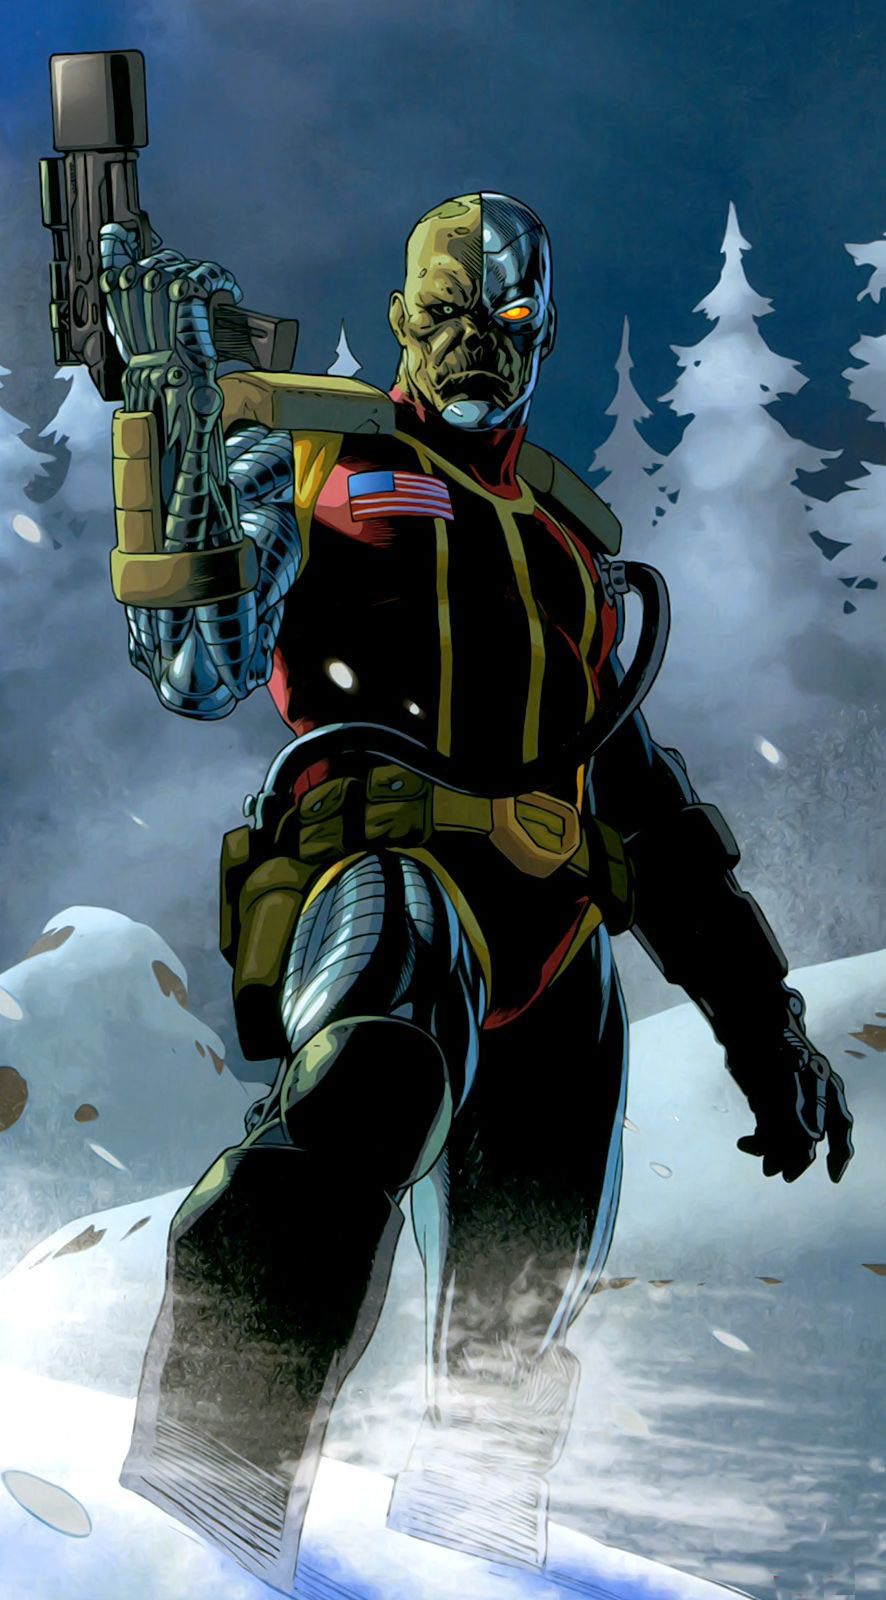 http://img2.wikia.nocookie.net/__cb20110918121354/marveldatabase/images/a/a6/Deathlok_Prime_(Earth-10511)_from_Uncanny_X-Force_Vol_1_5.jpg